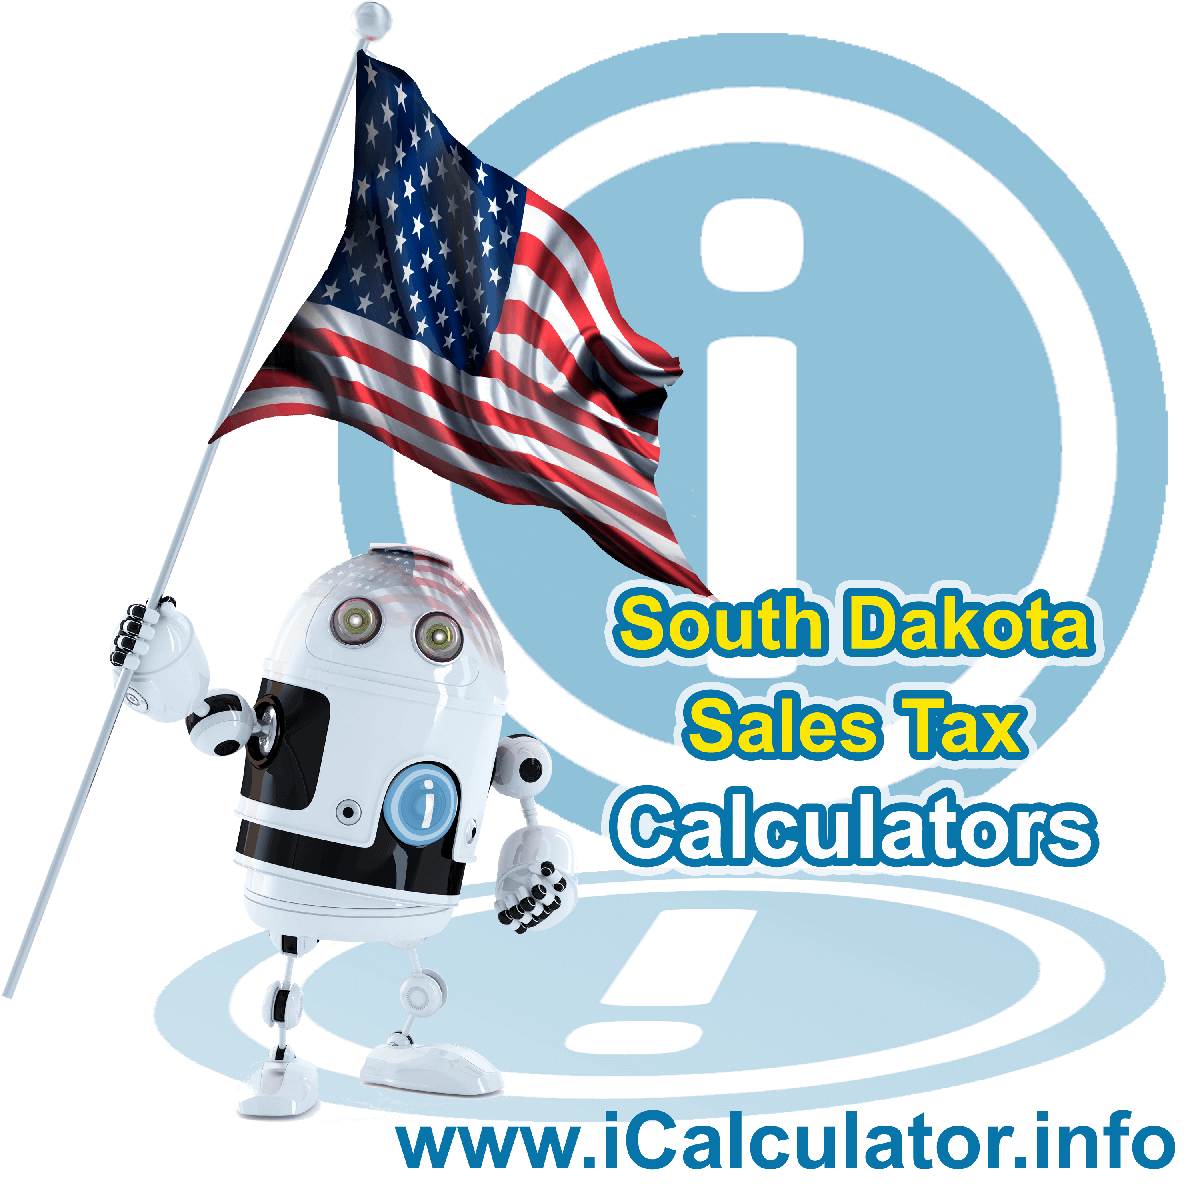 Springfield Sales Rates: This image illustrates a calculator robot calculating Springfield sales tax manually using the Springfield Sales Tax Formula. You can use this information to calculate Springfield Sales Tax manually or use the Springfield Sales Tax Calculator to calculate sales tax online.